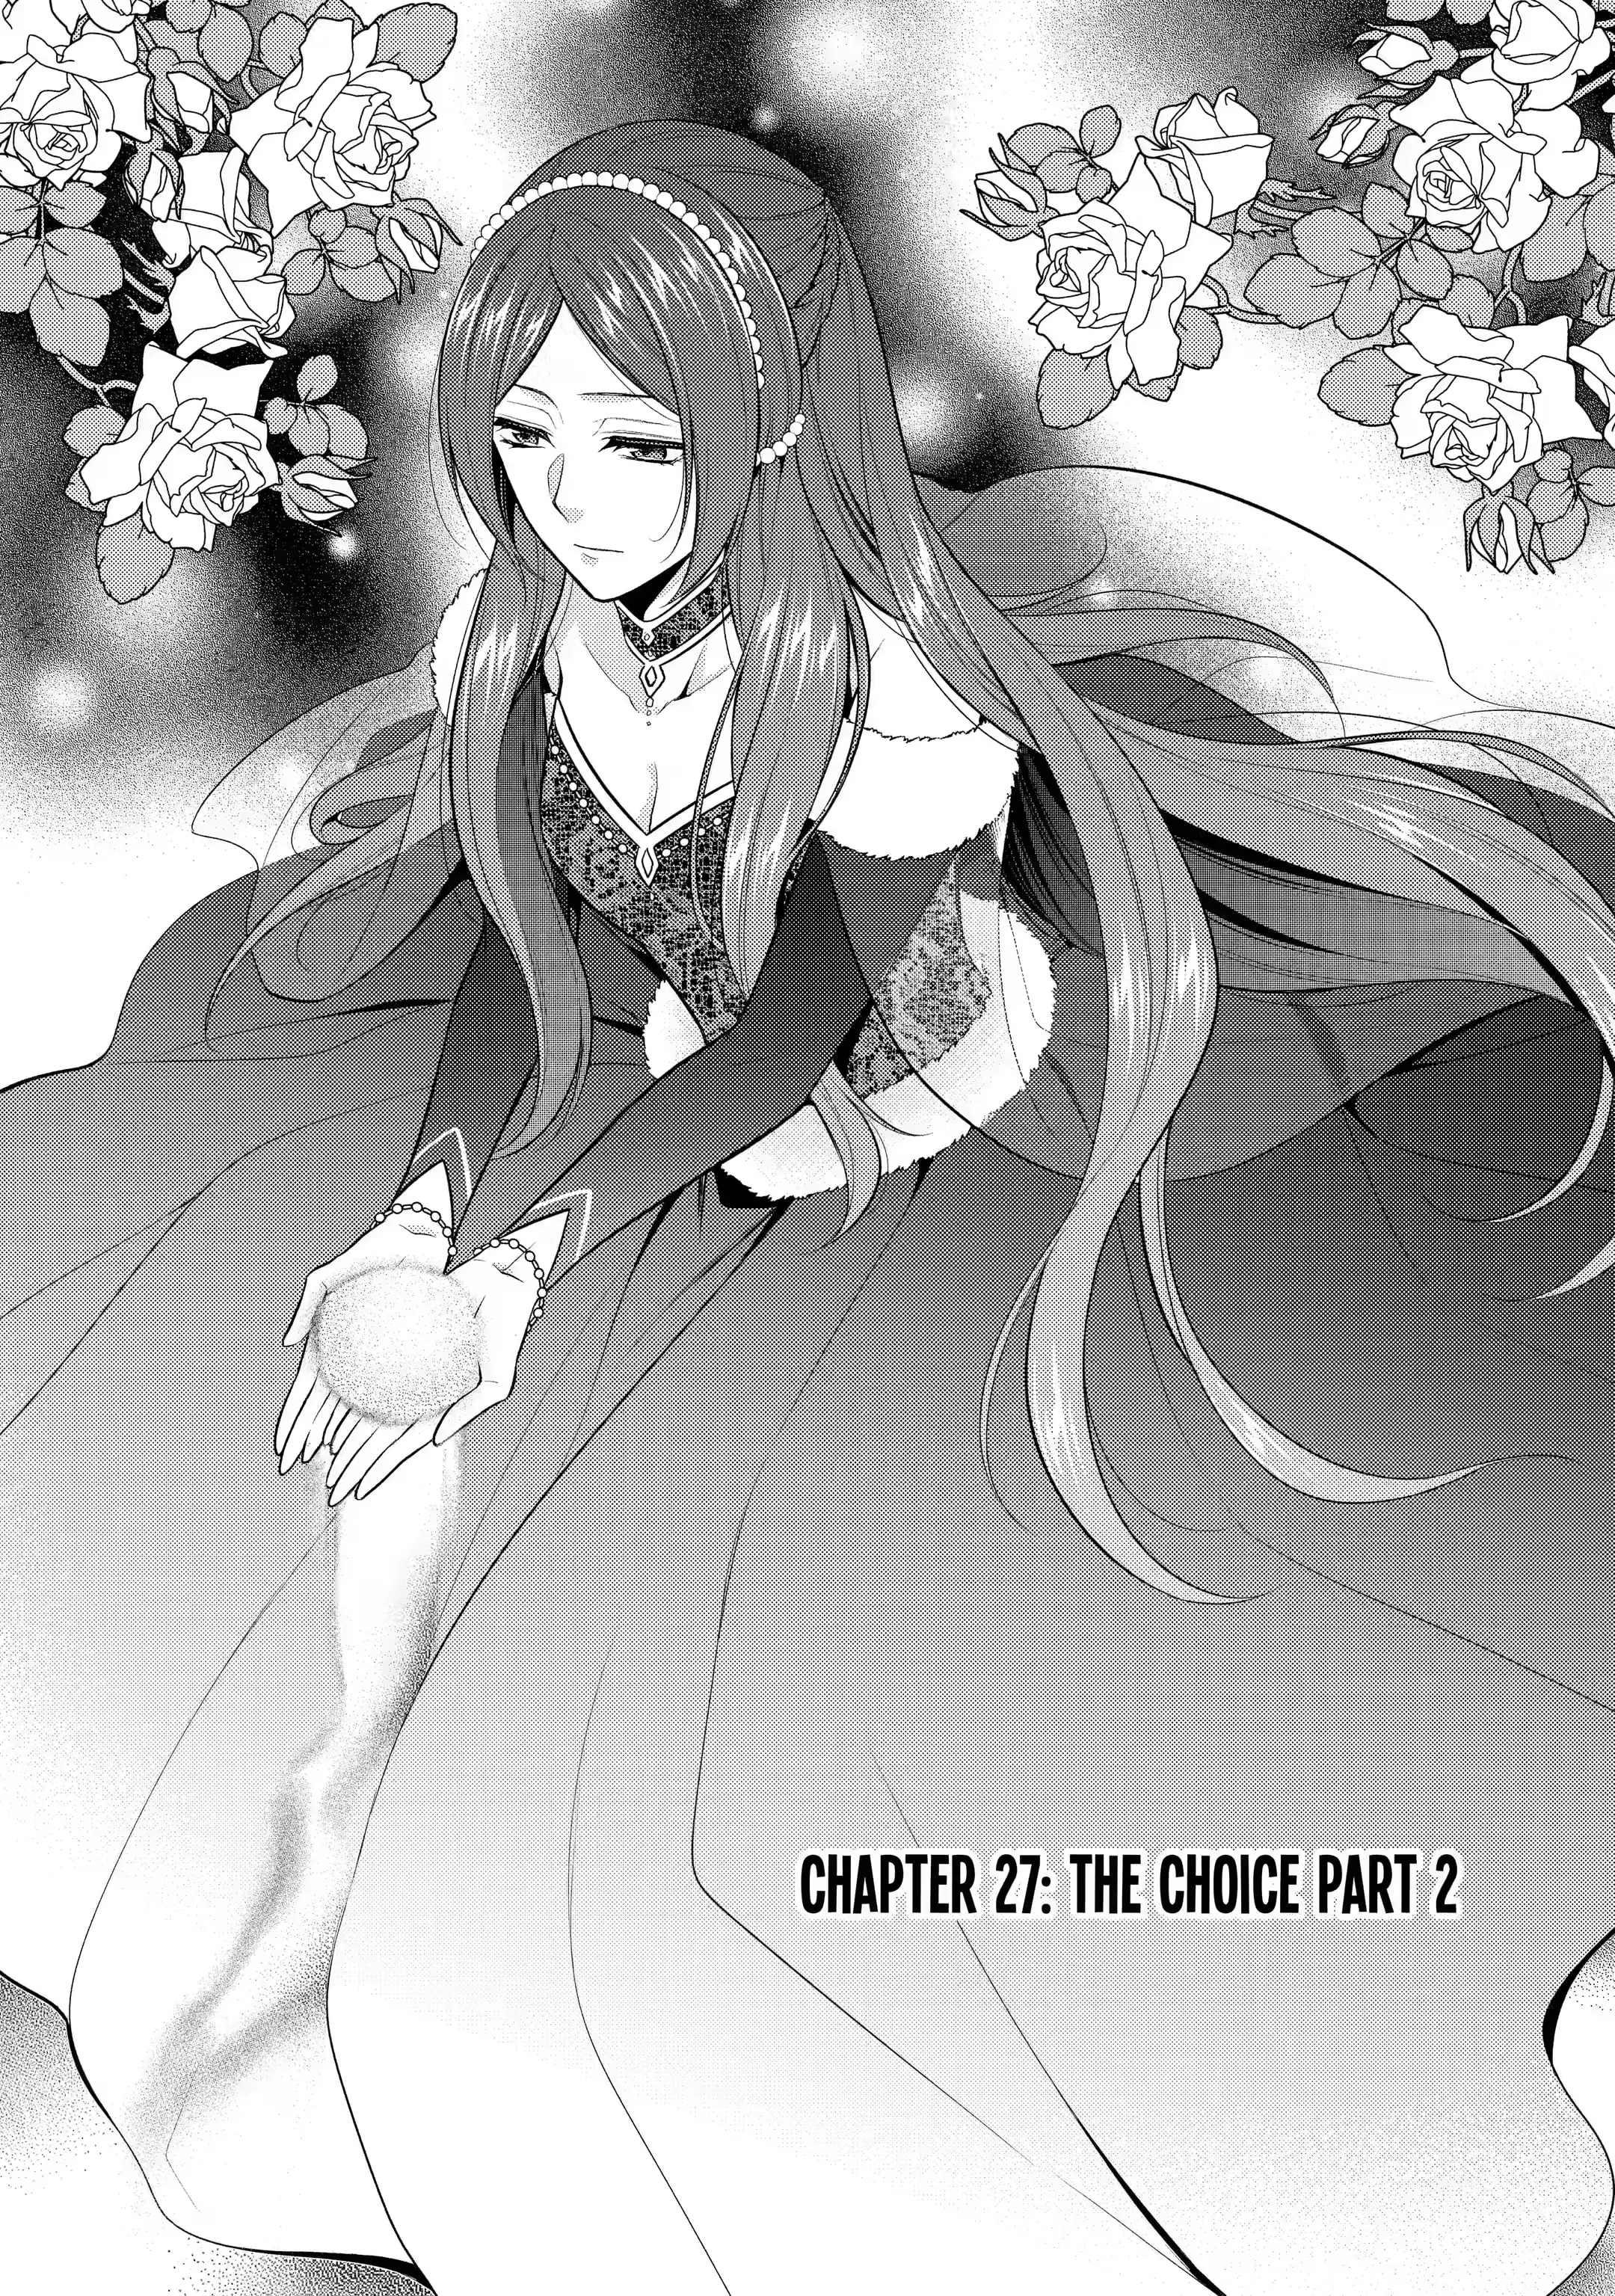 The Redemption of the Blue Rose Princess Chapter 27.1